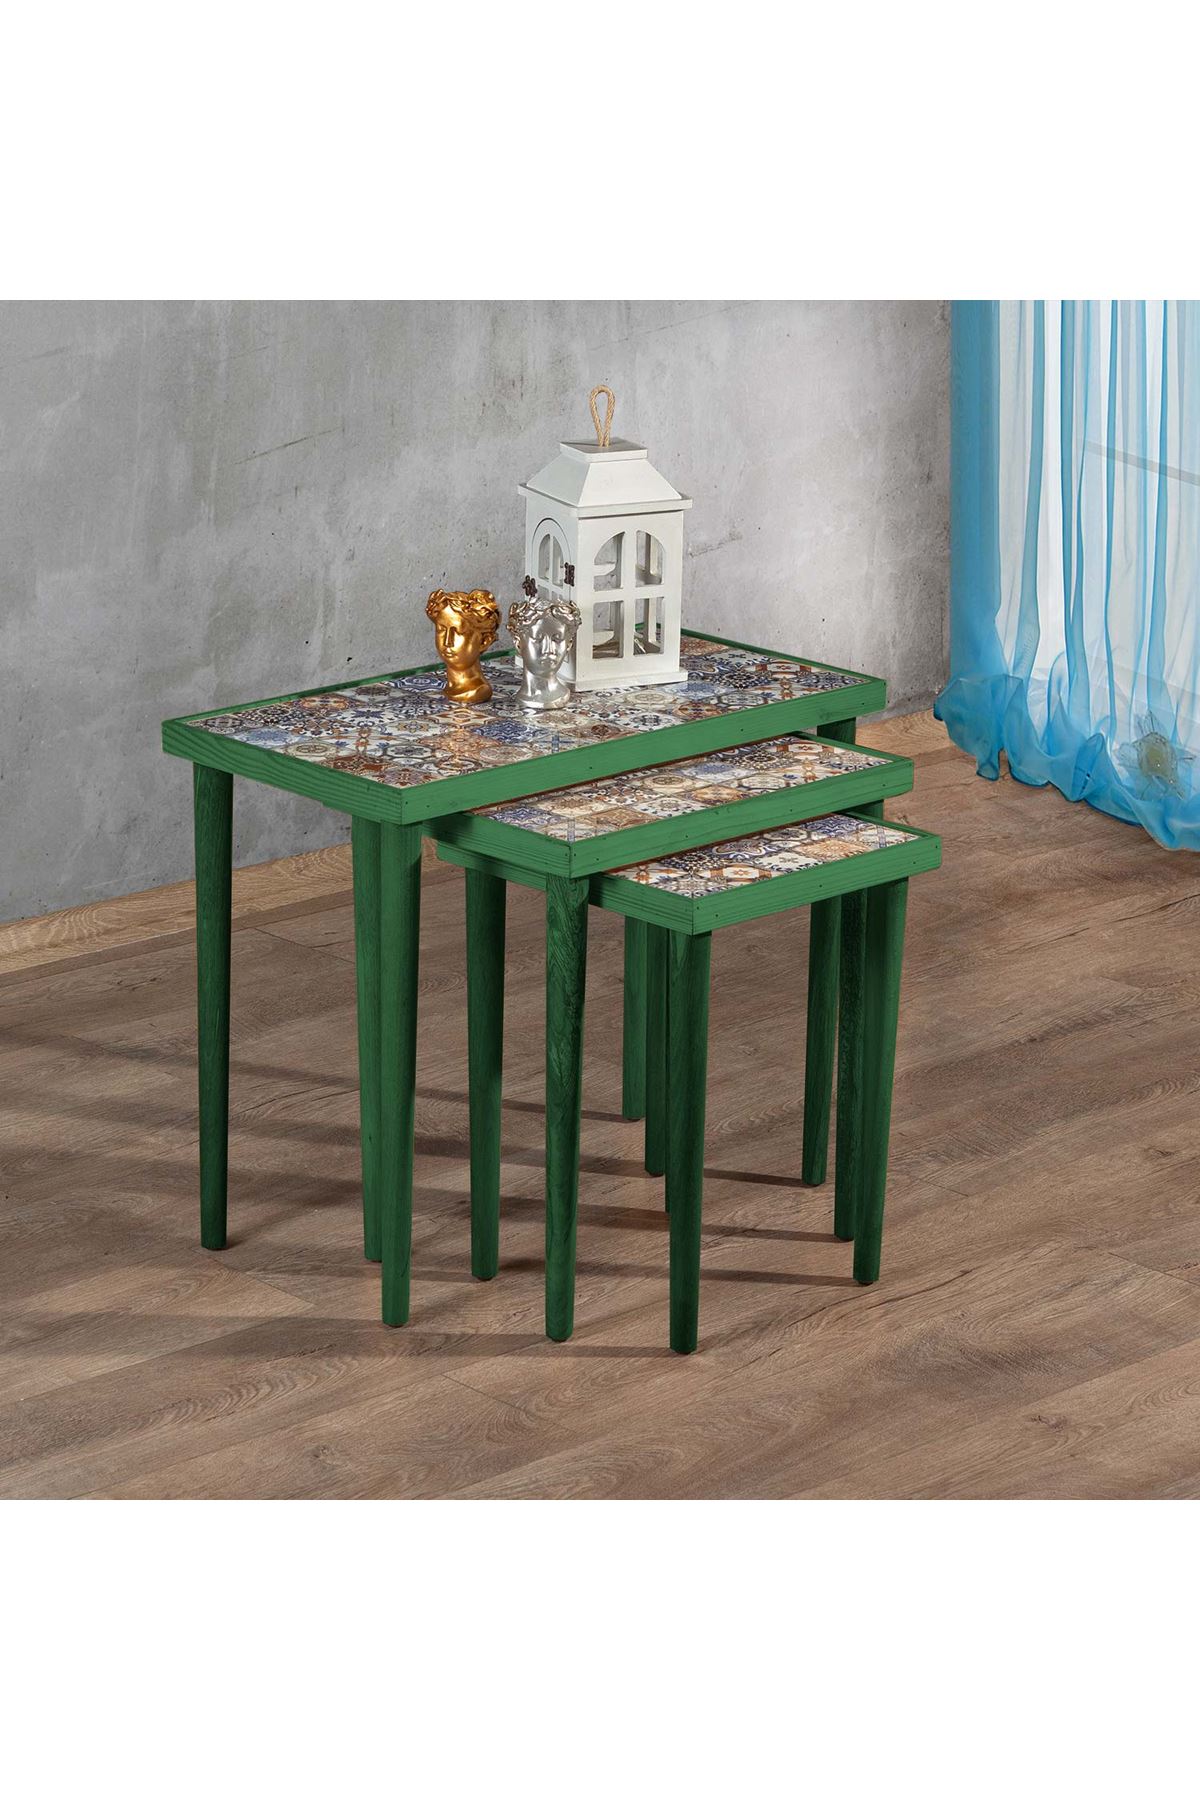 Bofigo Wooden Tile Center Table Wooden Solid Wood Coffee Table 62x32 Cm Black